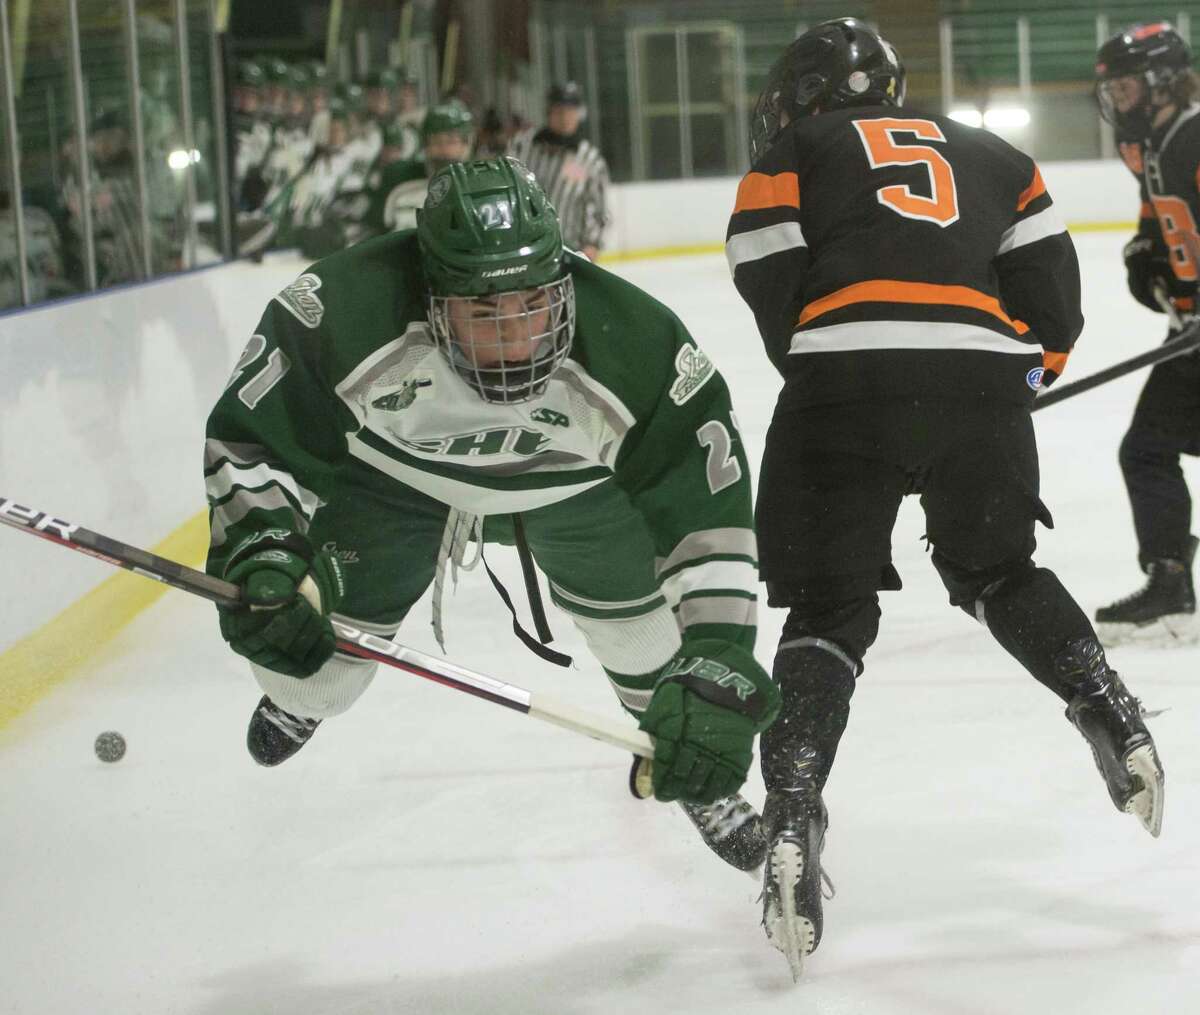 Shenendehowa's Nolan Sullivan, left, and Bethlehem's William Bievenue collide during a game earlier this season. Sullivan had two goals in Tuesday's Section II Division I title game at Union College's Messa Rink.